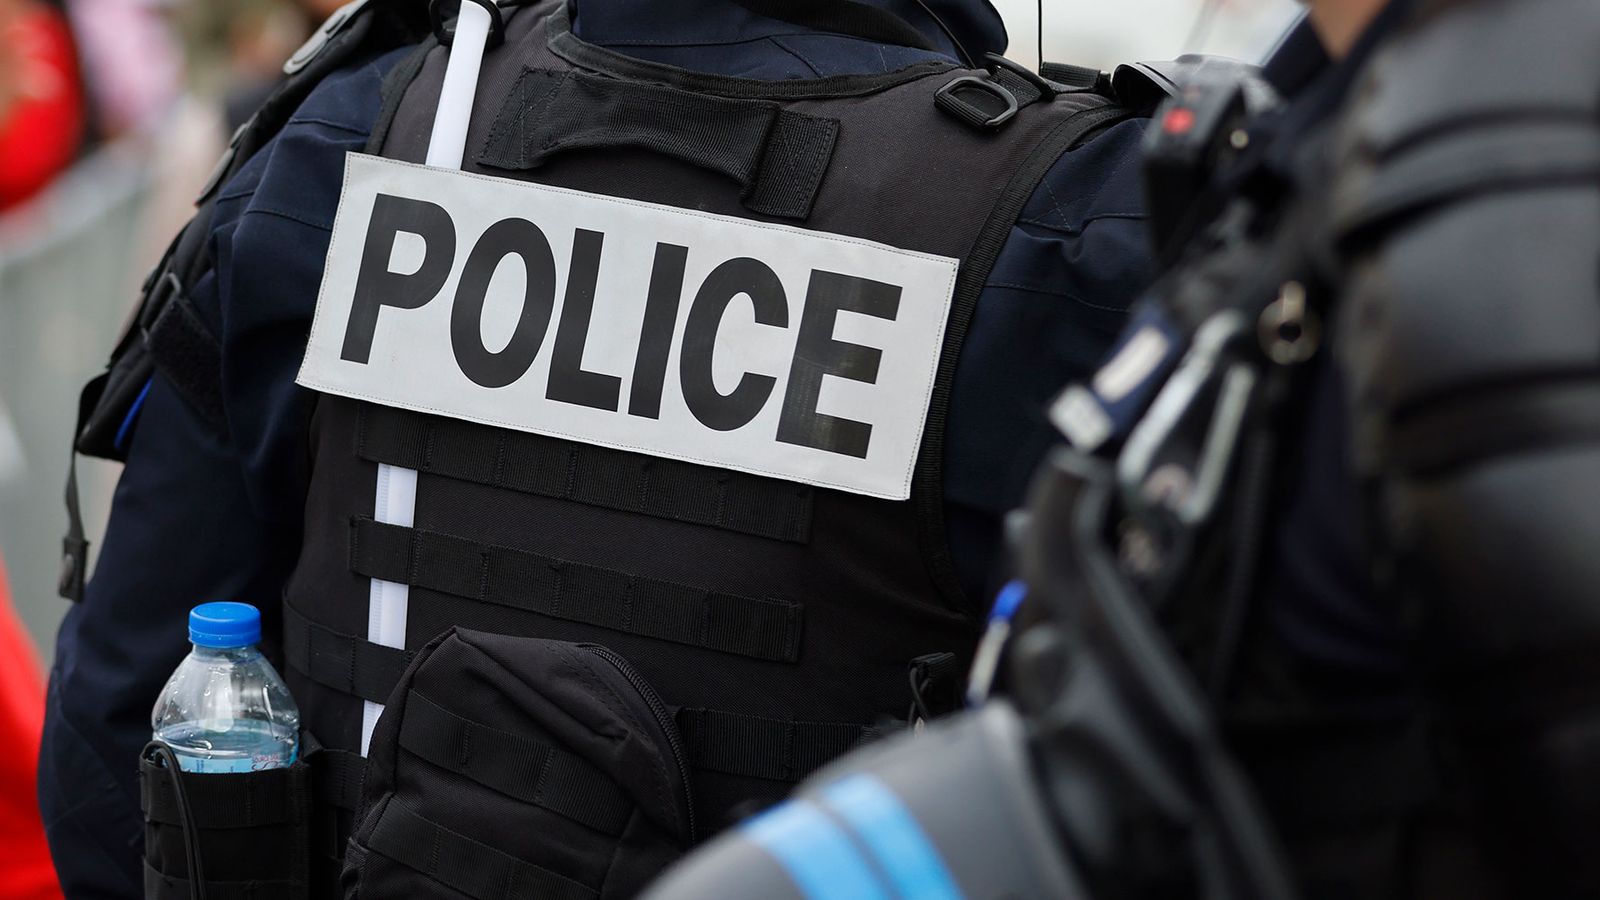 French police officer shoots dead driver who failed to obey order to stop